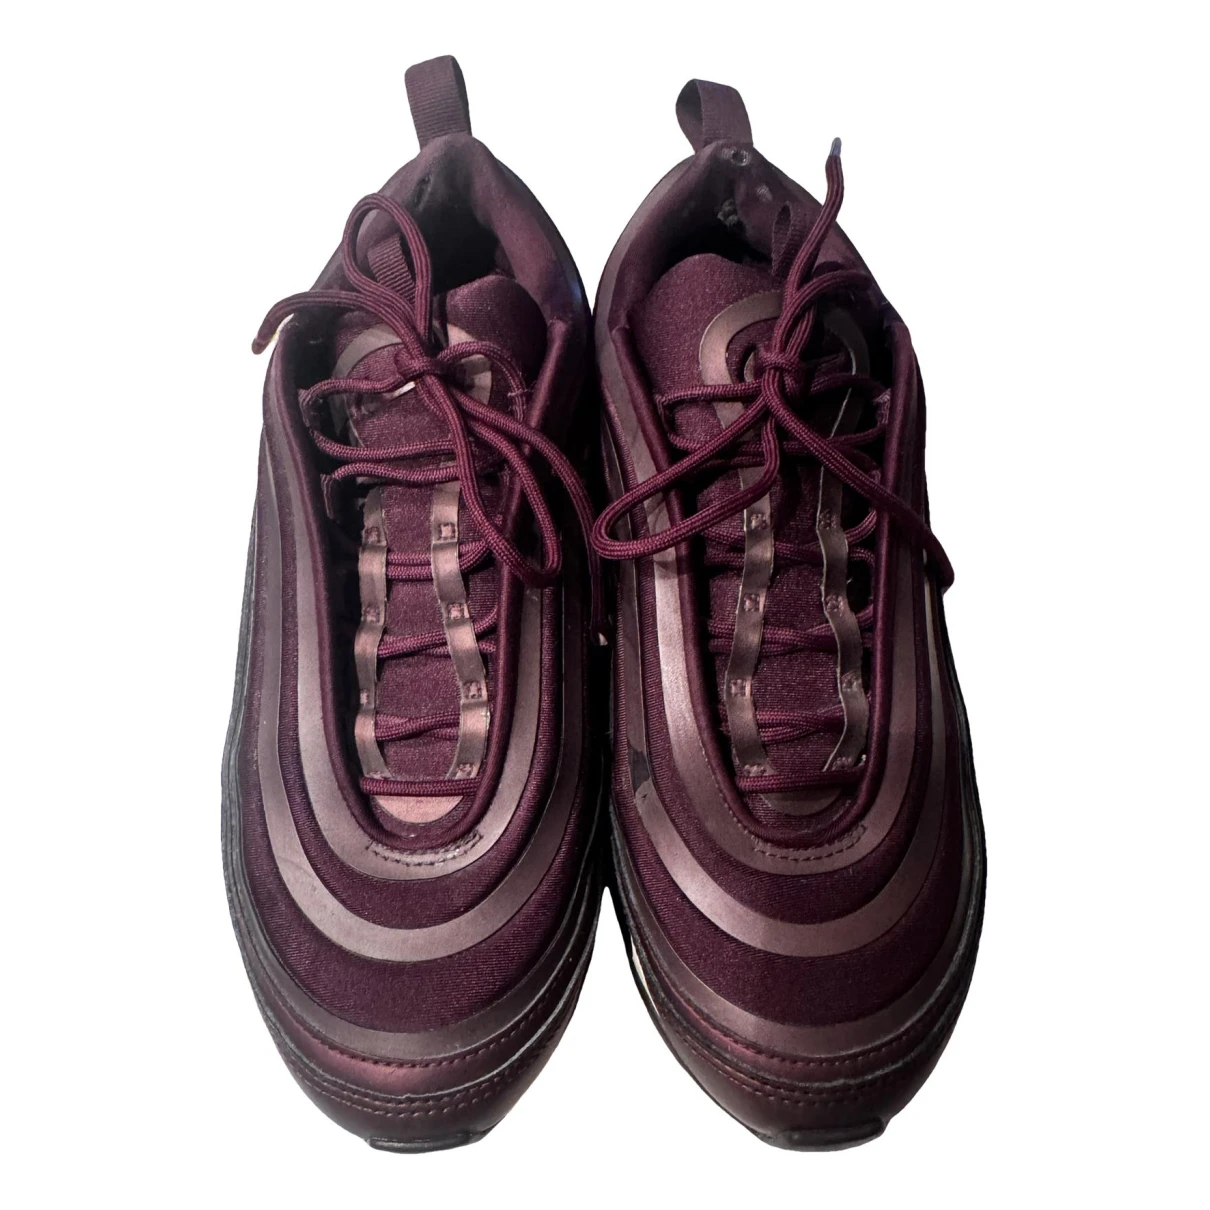 Pre-owned Nike Air Max 97 Trainers In Burgundy